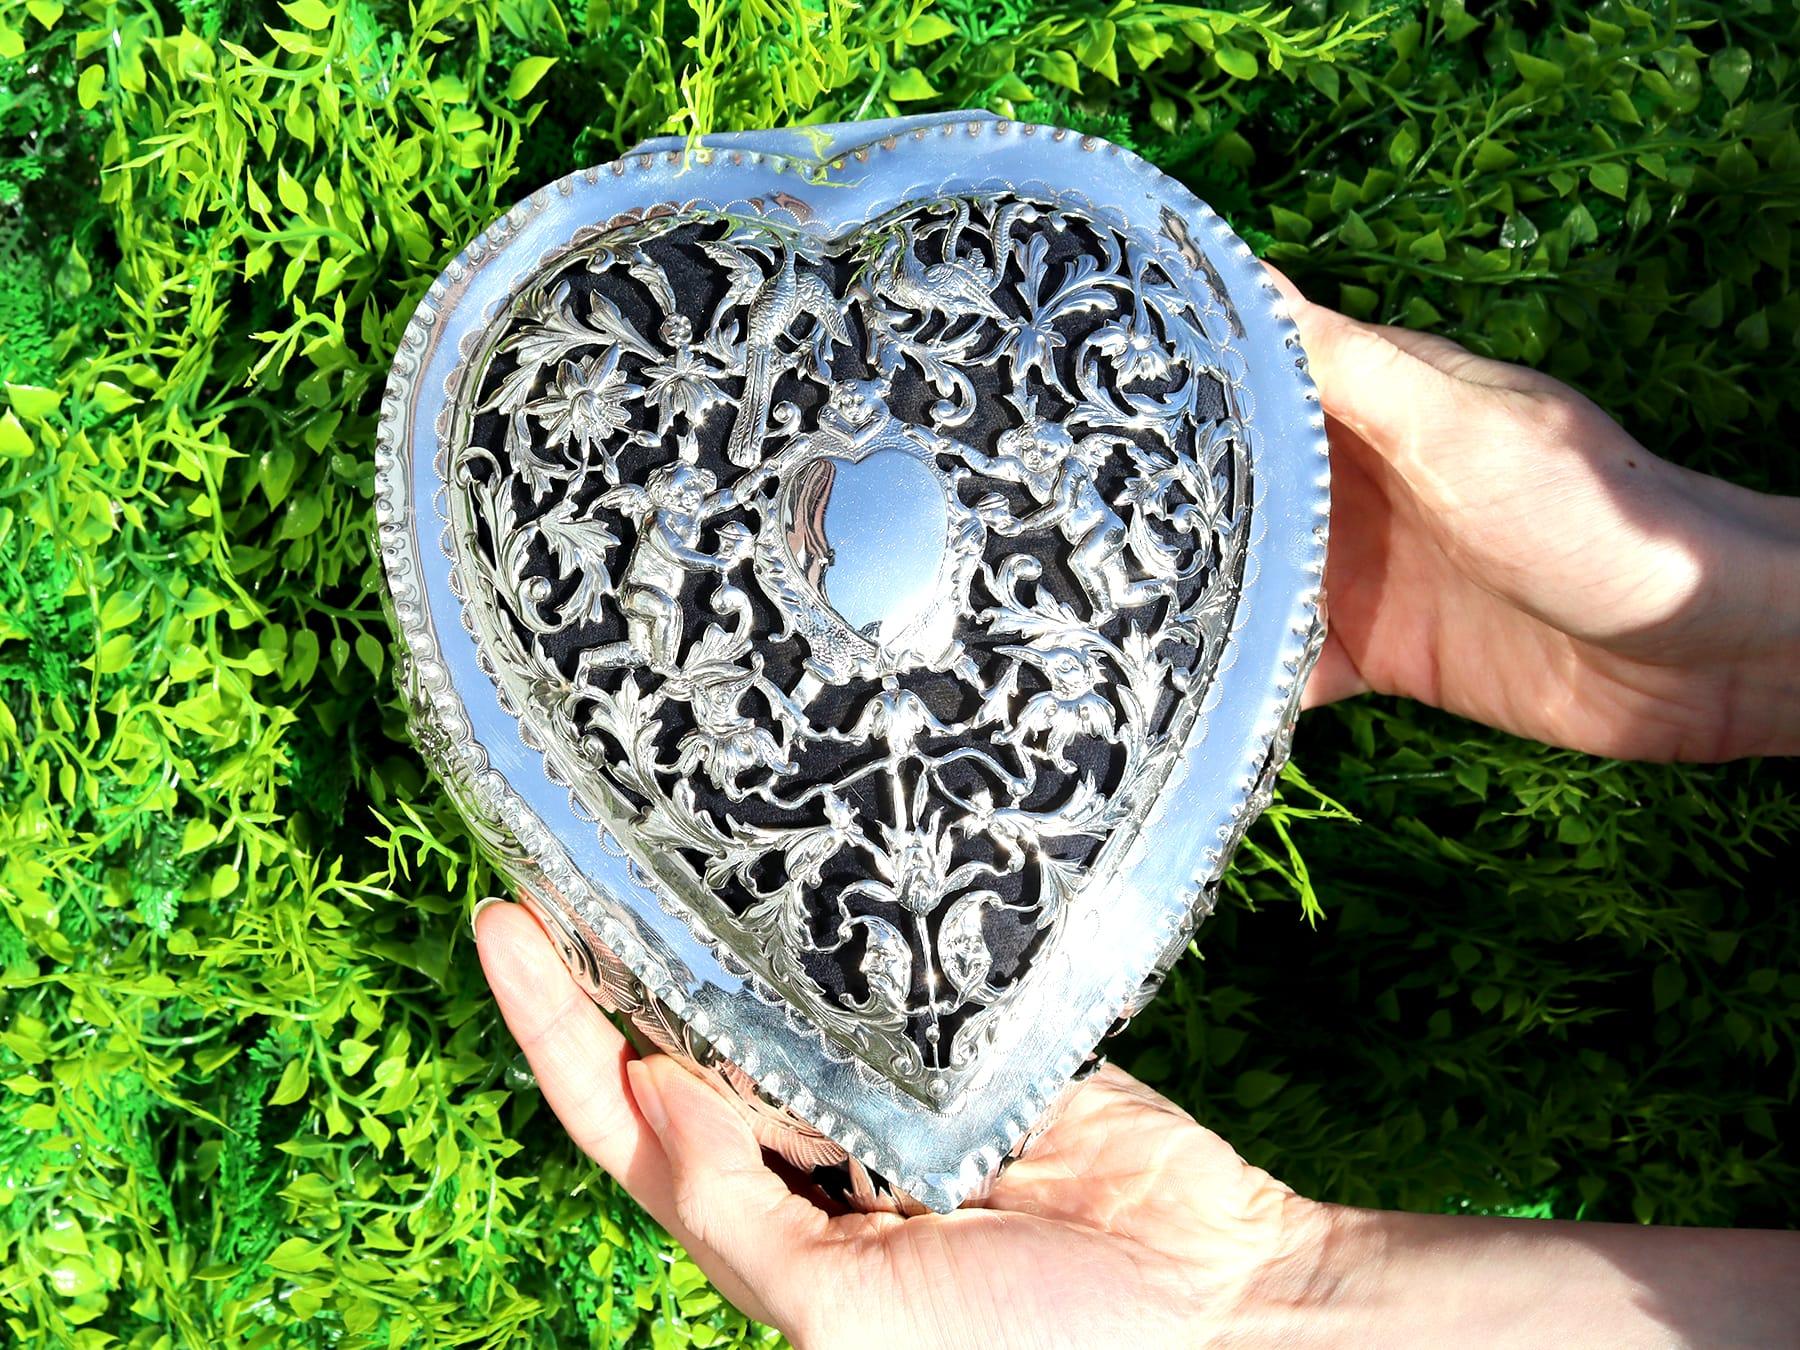 An exceptional, fine and impressive, large antique Victorian English sterling silver heart-shaped jewellery box; an addition to our diverse Victorian boxes collection.

This exceptional and rare antique sterling silver box has a heart shaped